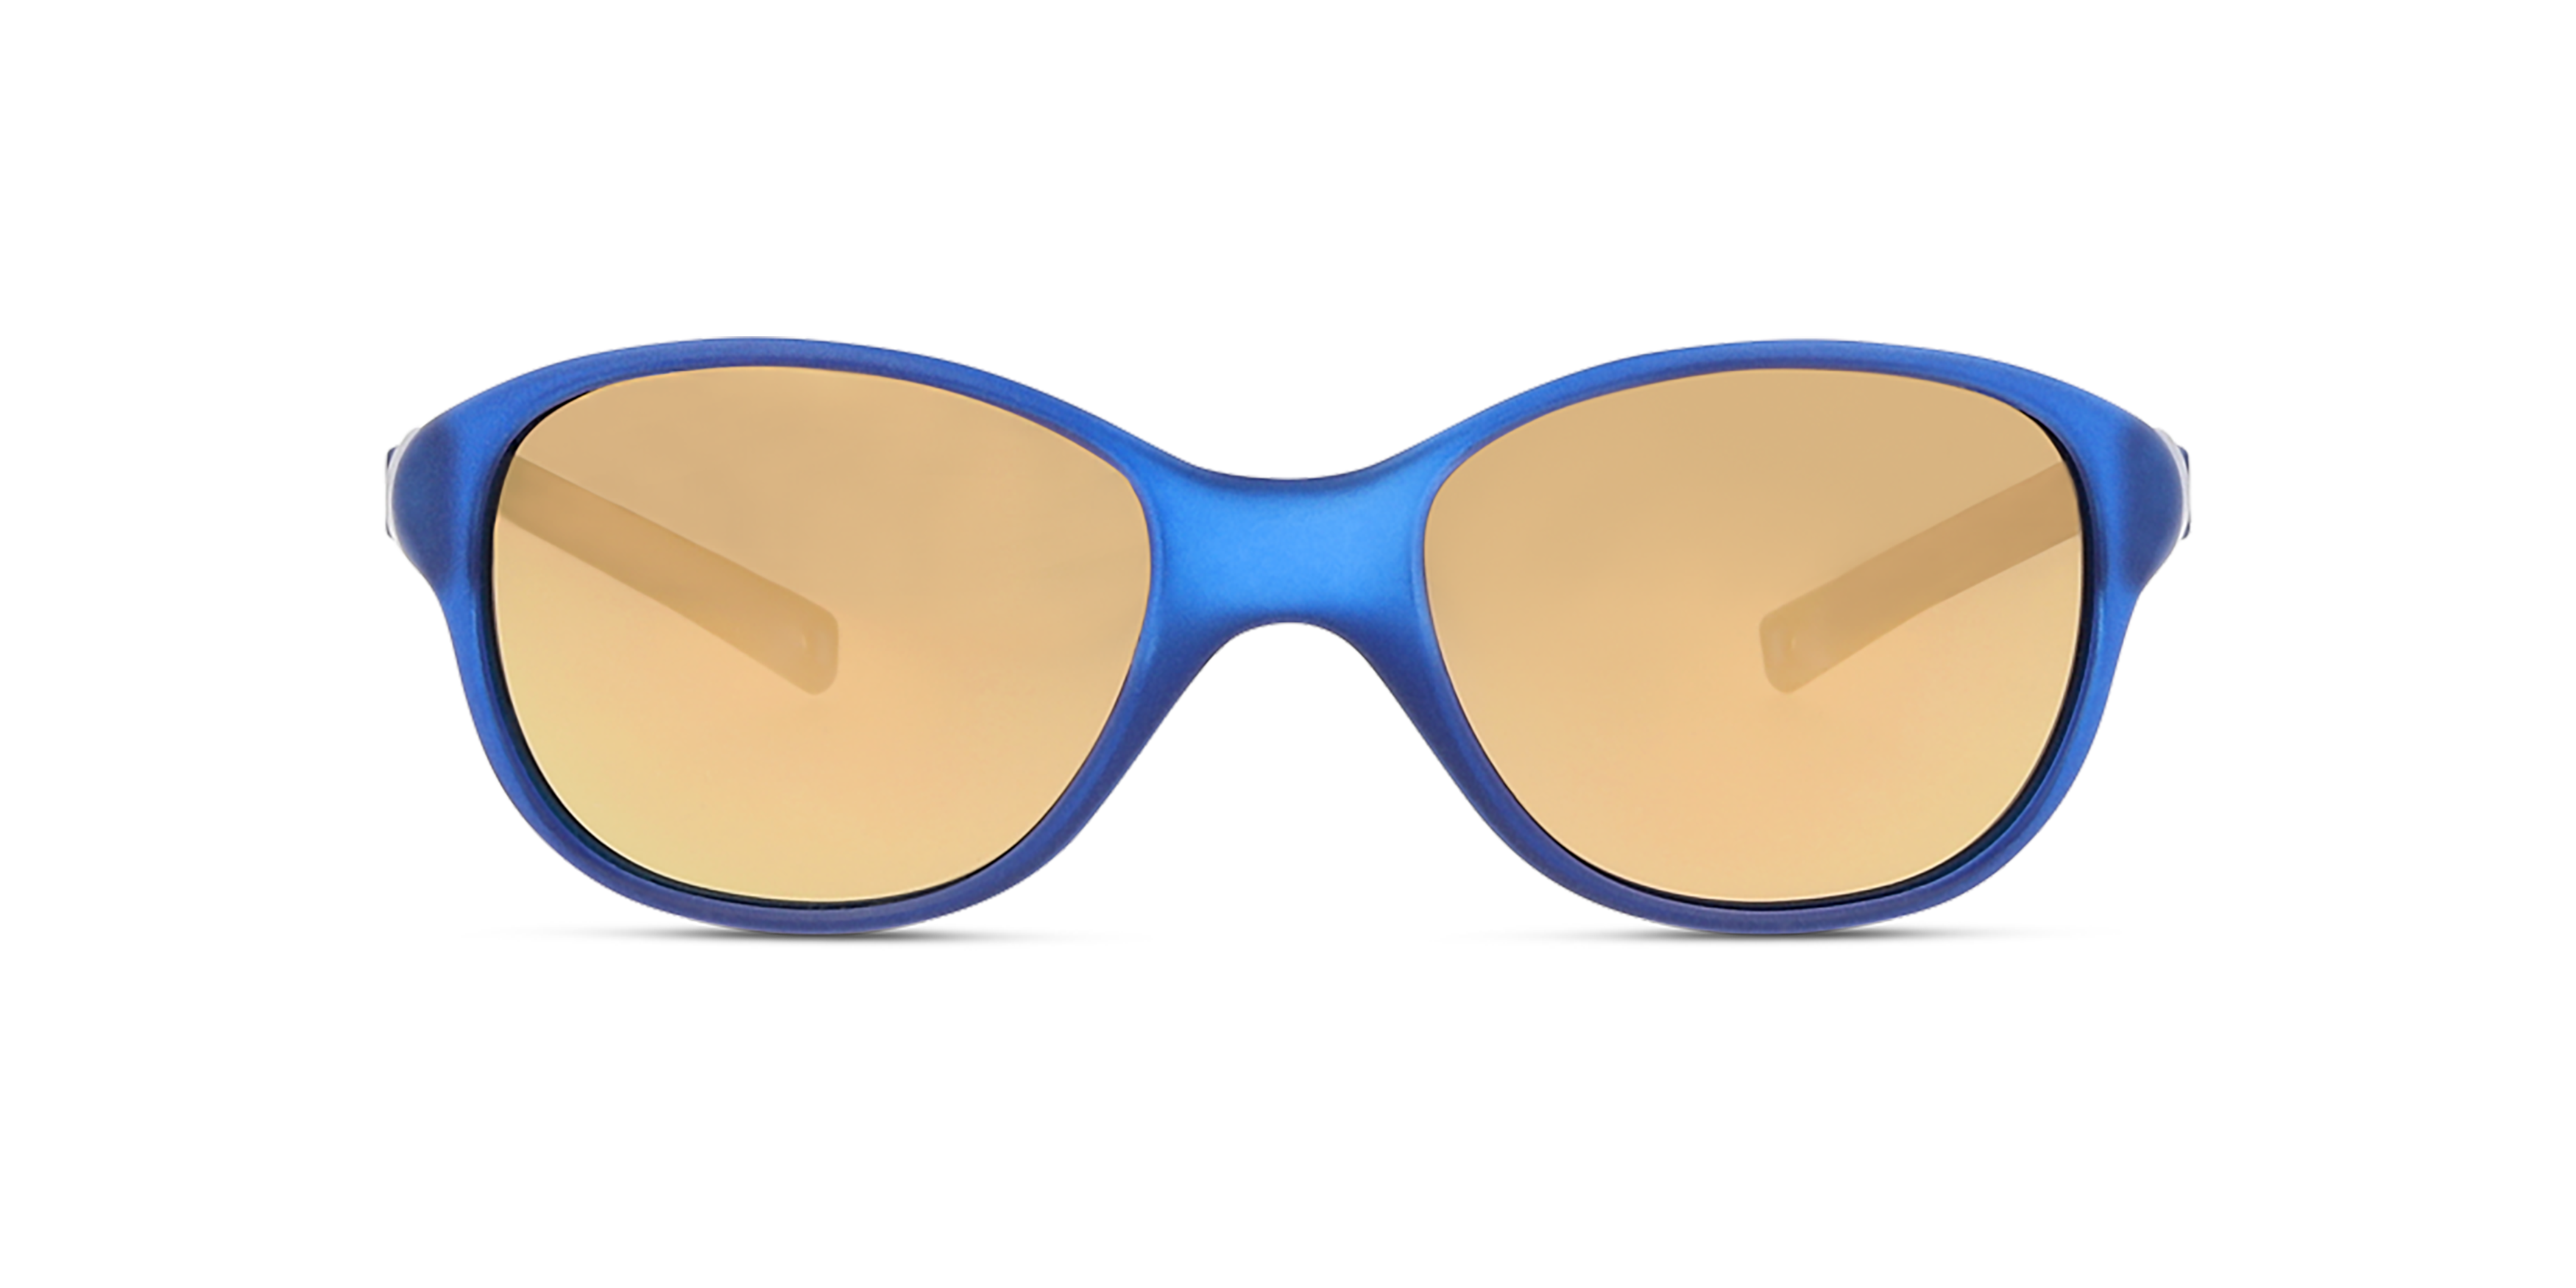 [products.image.front] JULBO Romy J508 32